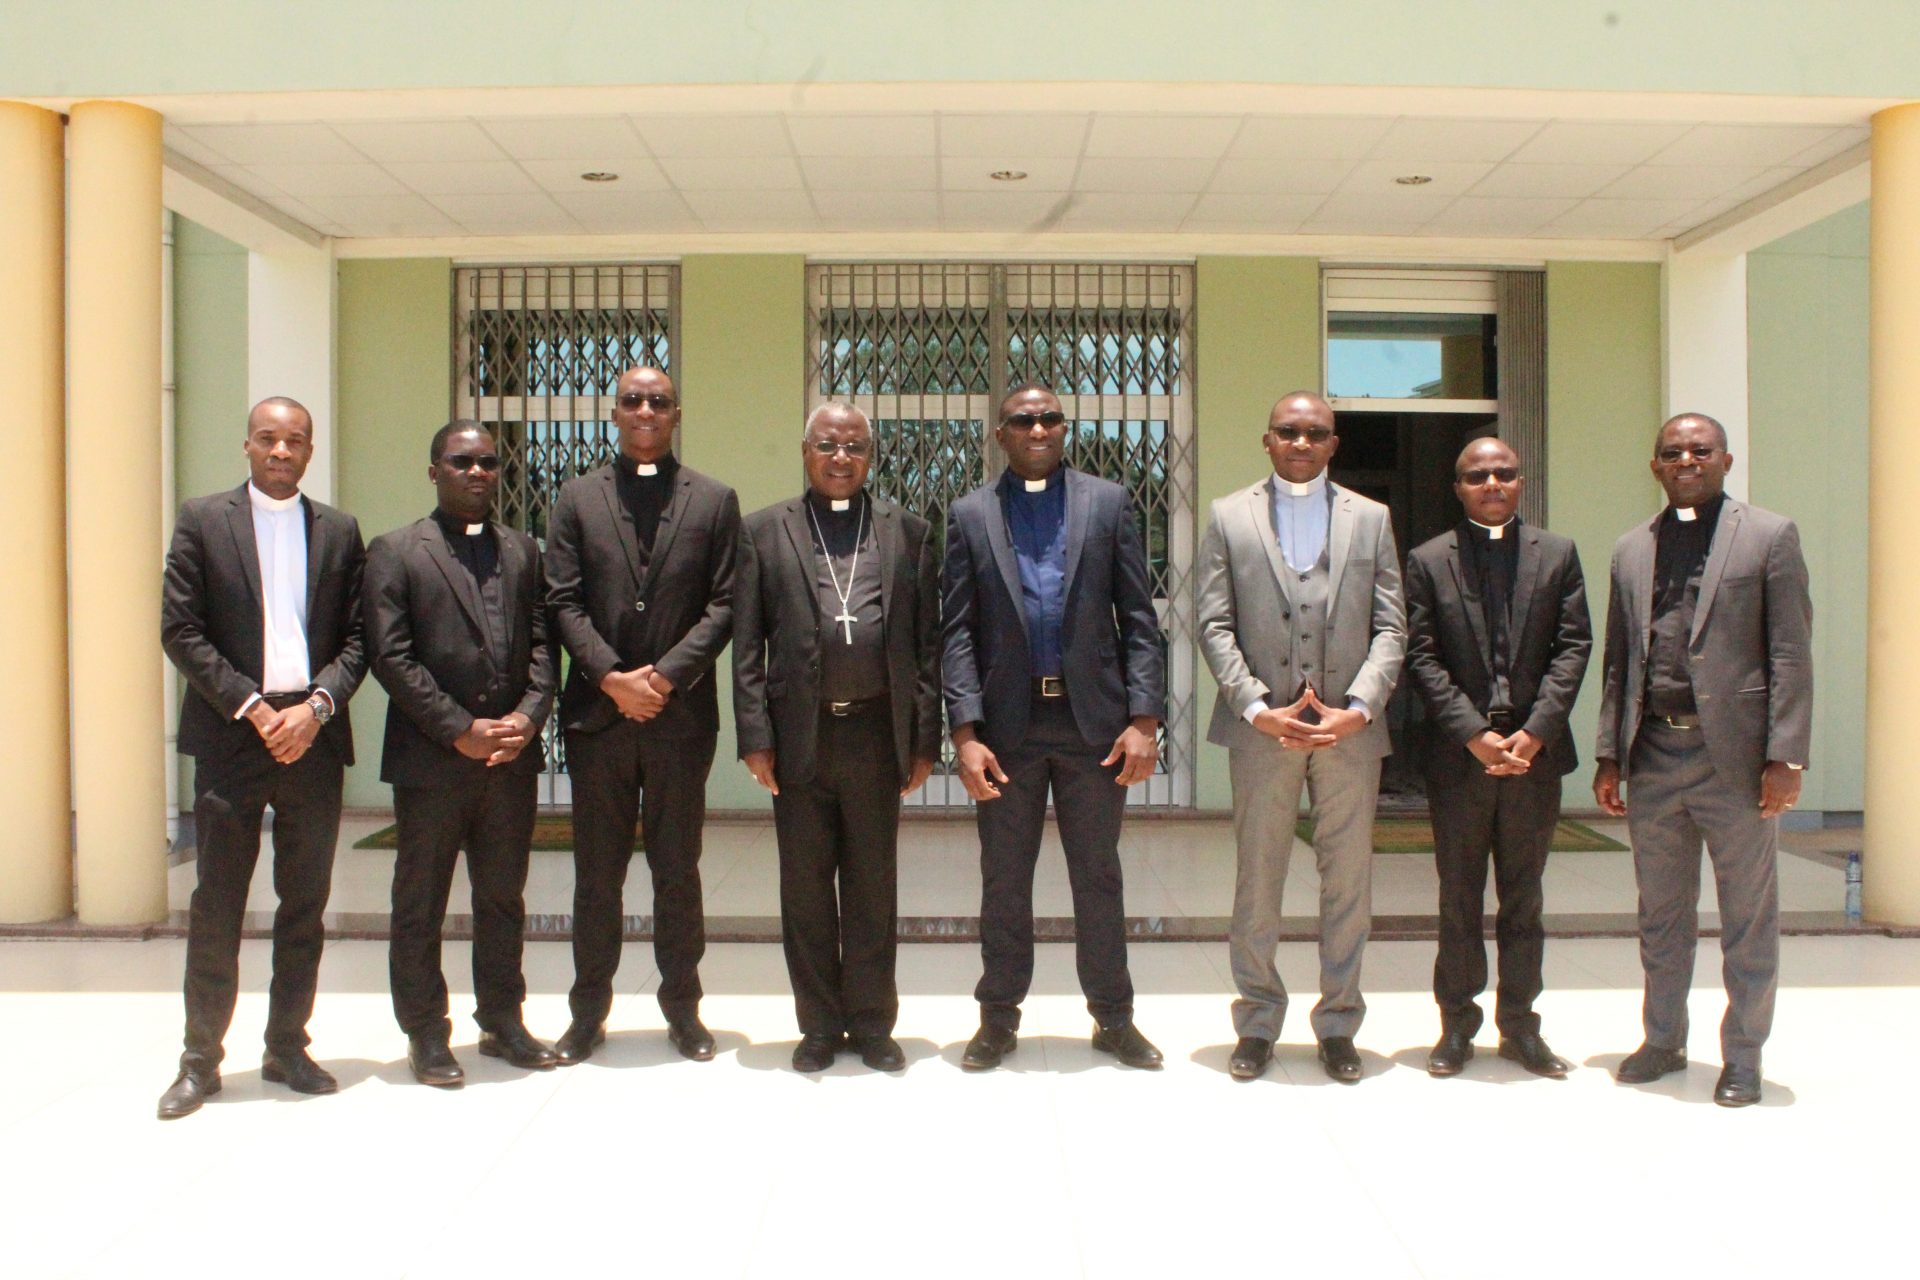 Deacons-to-be take Oaths